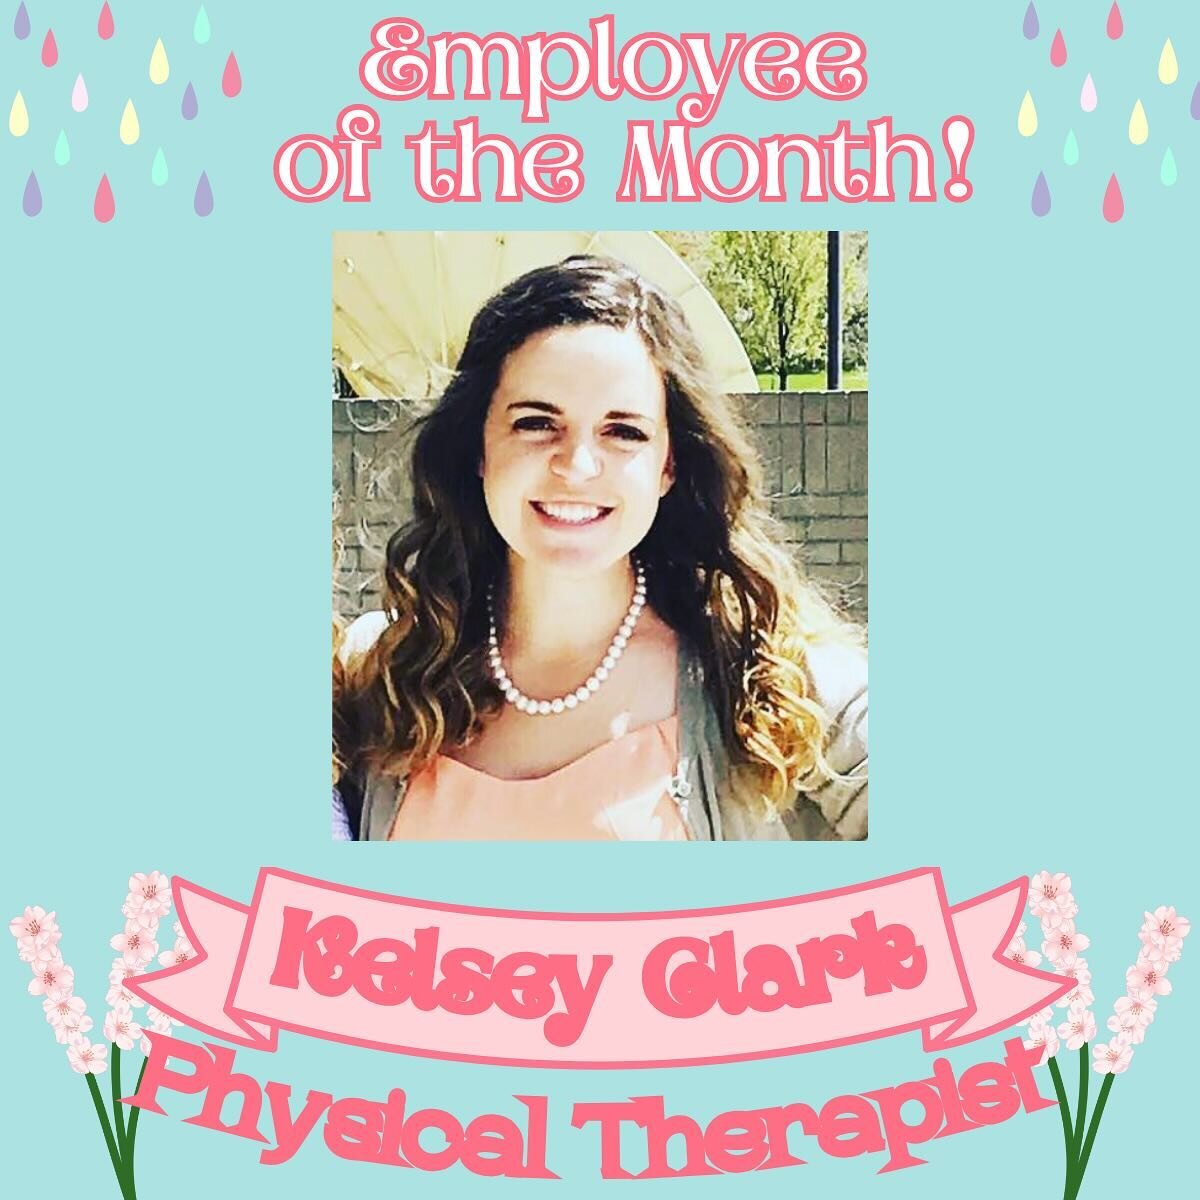 Our April Employee of the Month is Kelsey Clark! 💜

Kelsey has been a PTA with the Wellness Center for 5 years.  We appreciate all of her hard work and dedication to our company and to all of the kiddos and families! She is an awesome team player an